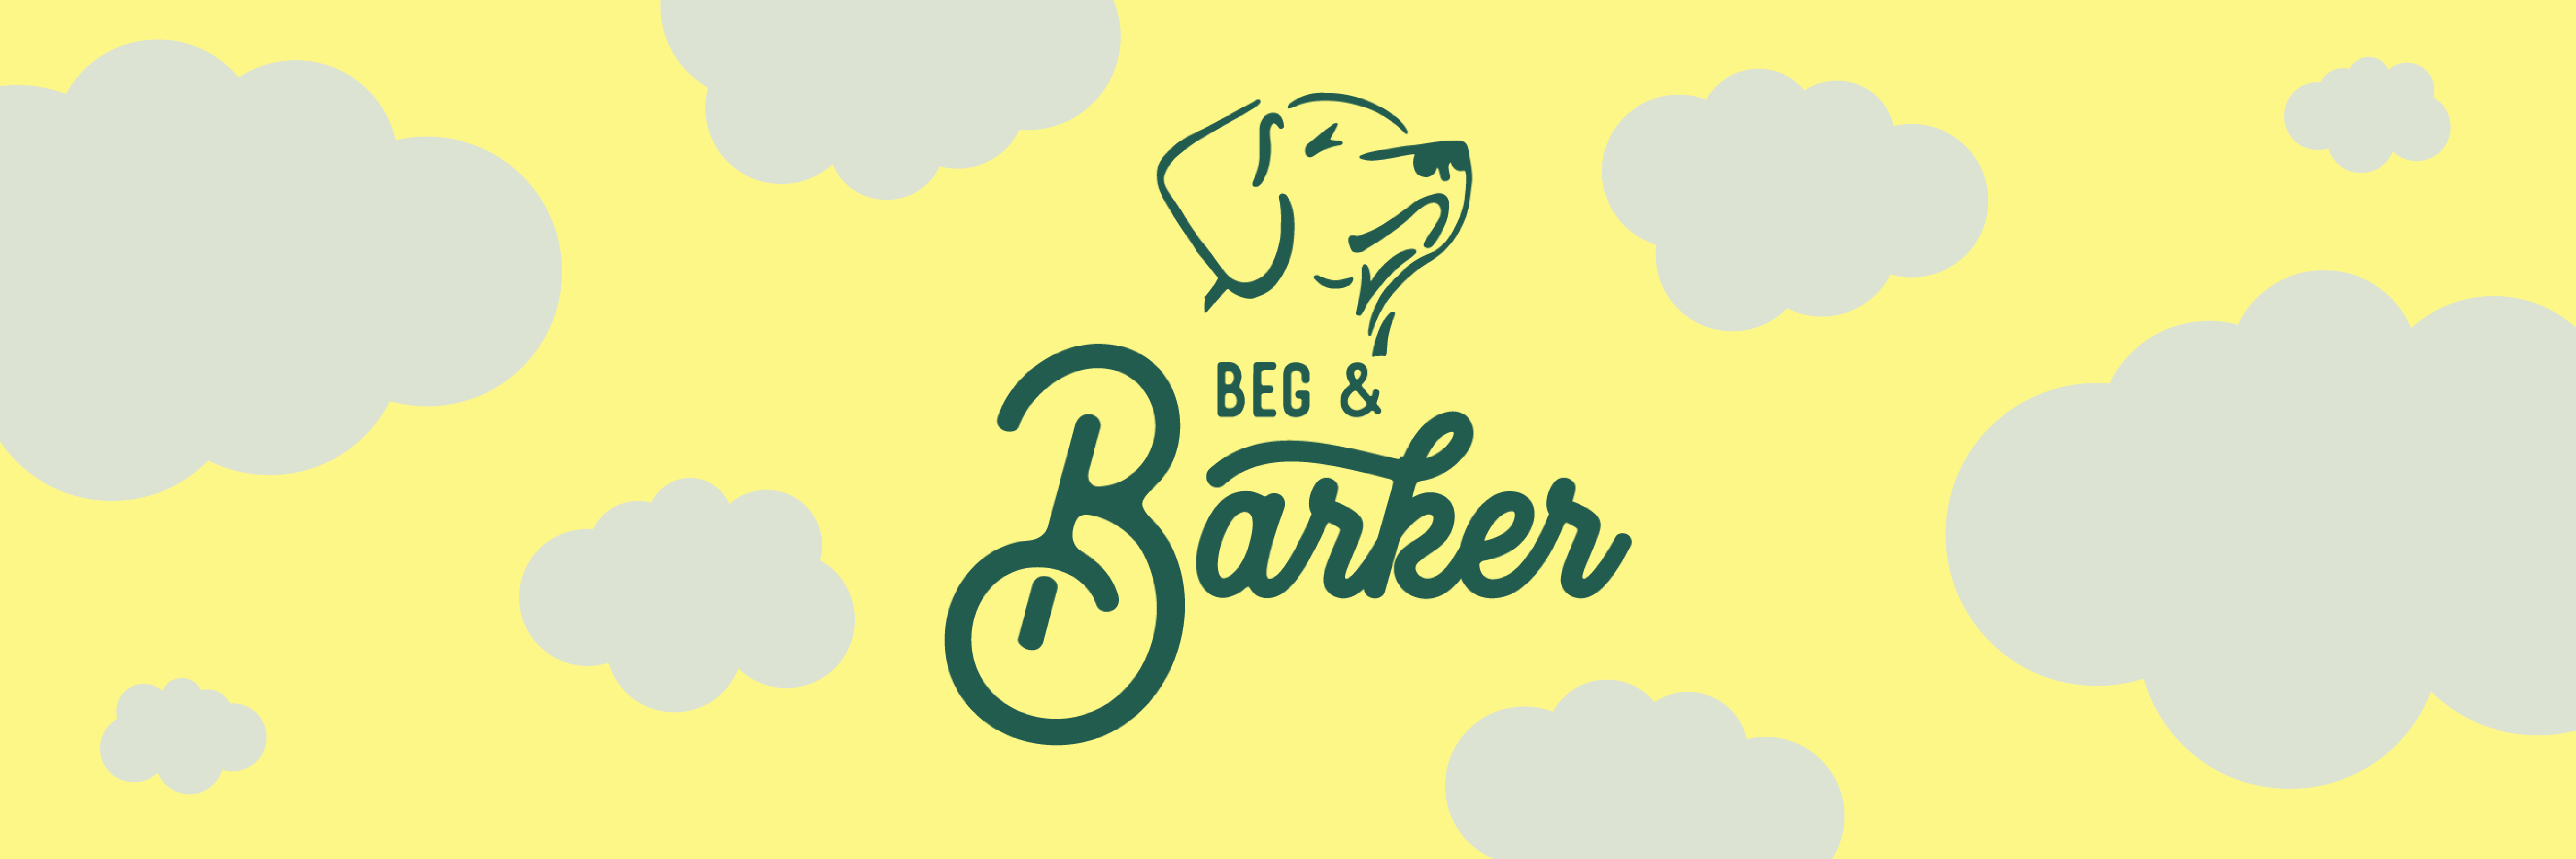 New to Pet Food Experts: Beg & Barker